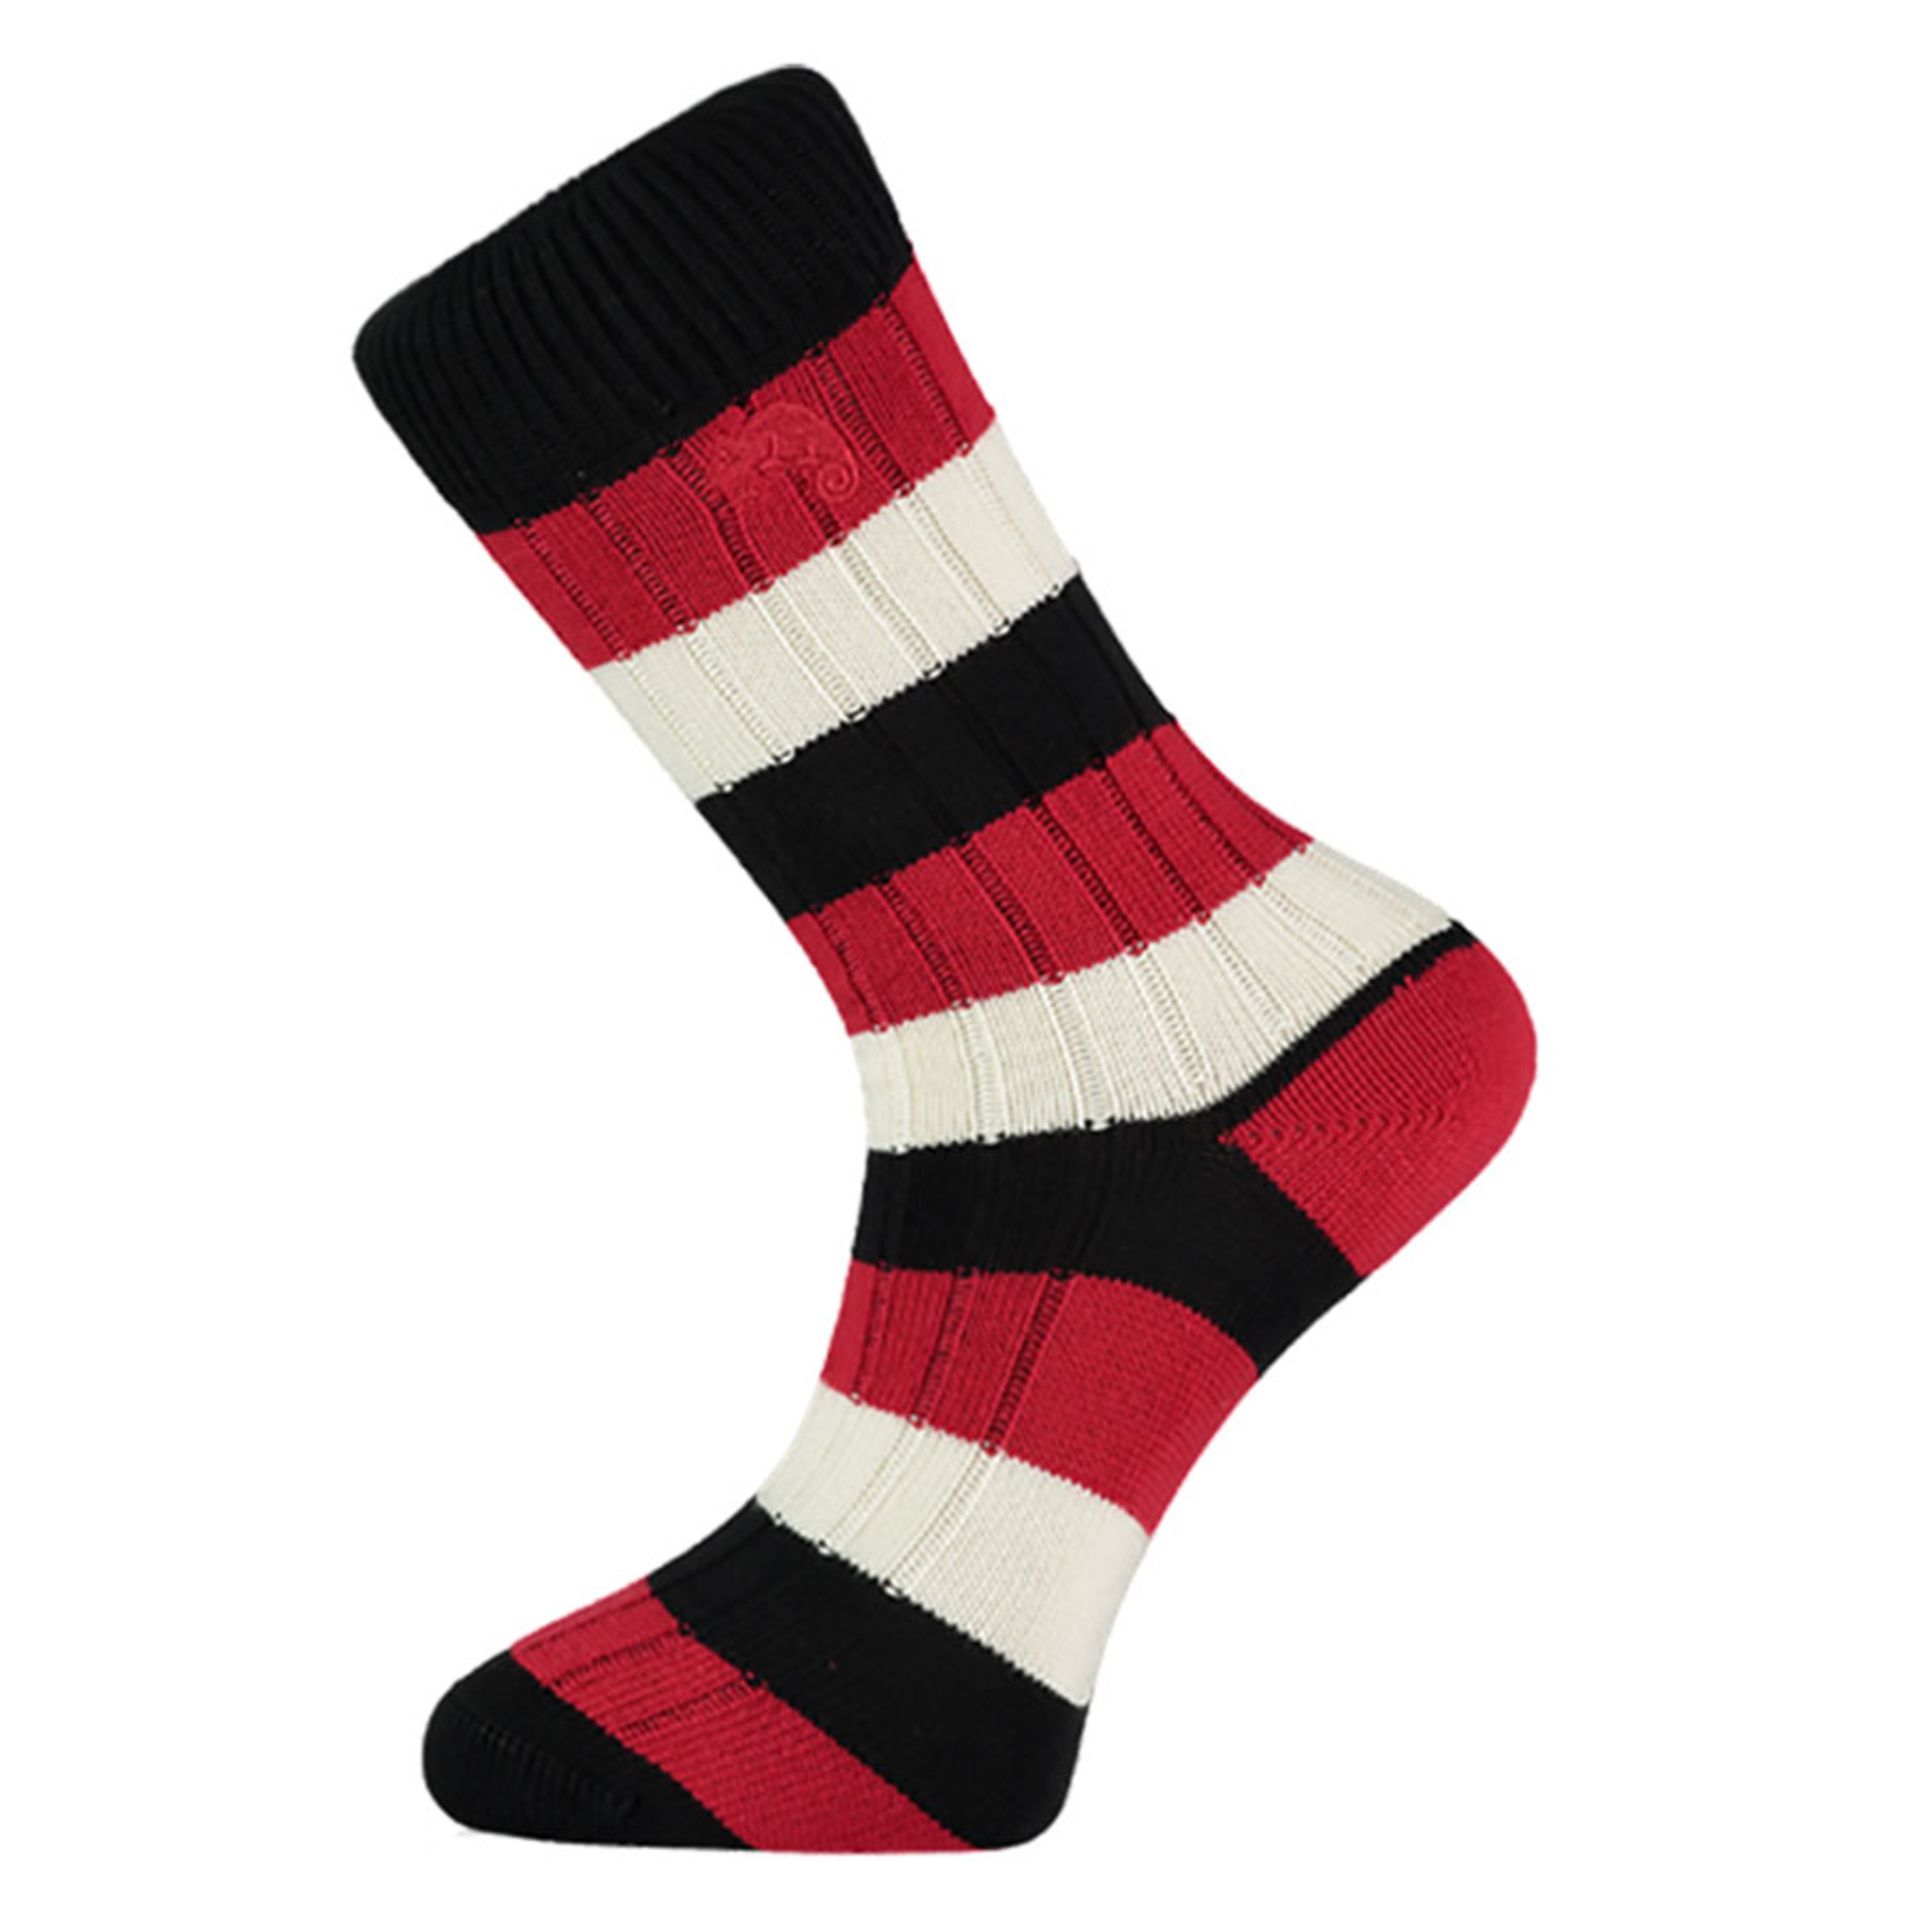 Approximately 5930 Pairs of Gents Socks, majority 94% cotton, sizes 3 ½ - 6 ½ & 7 – 11, various - Image 2 of 46